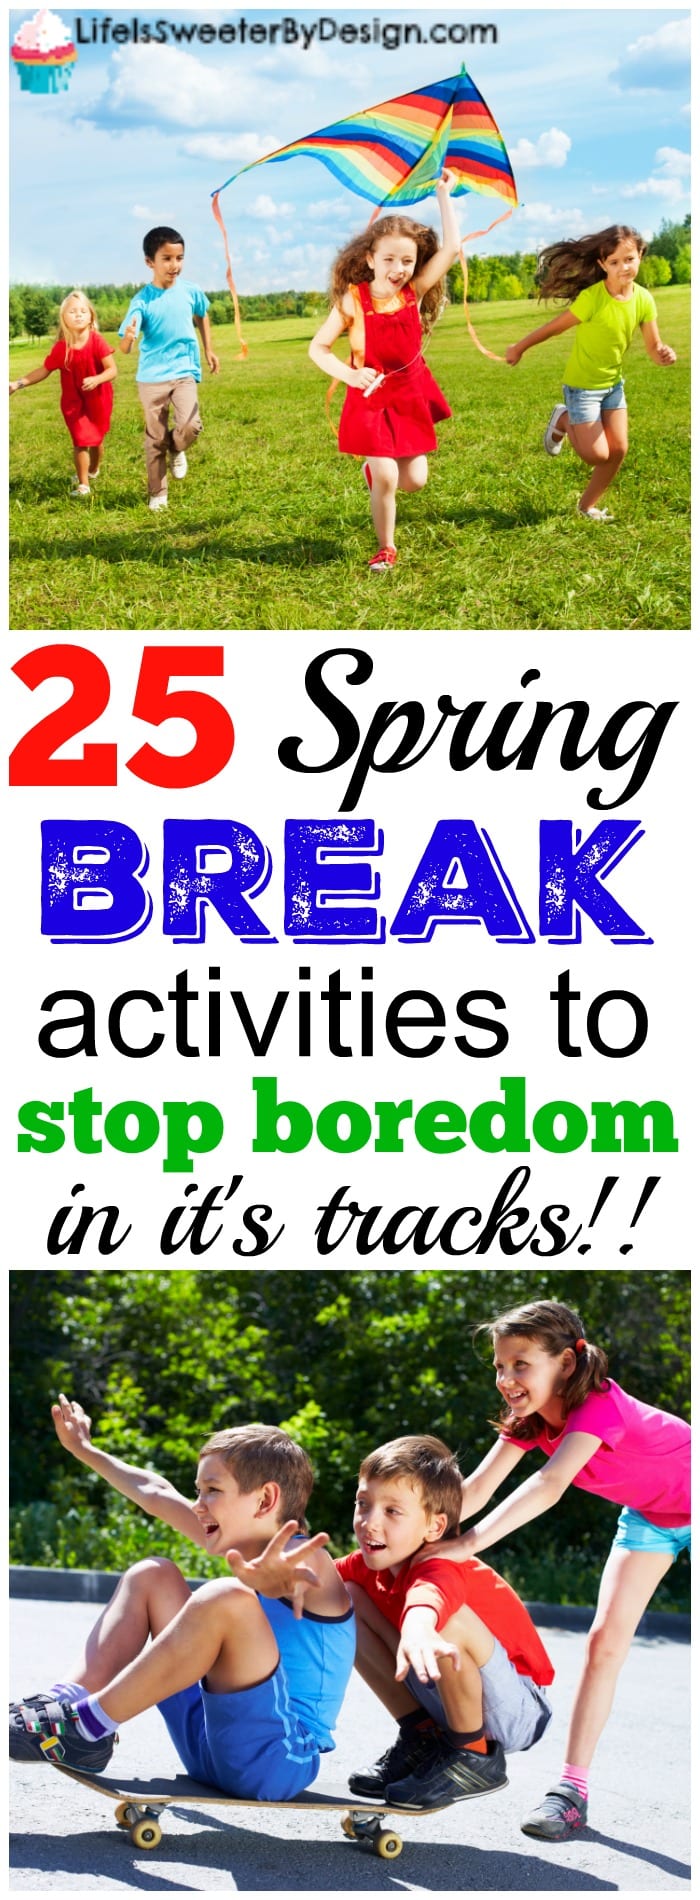 Spring break ideas to keep boredom at bay! These spring break activities are fun for kids and the whole family. Keep the children busy during spring break this year!